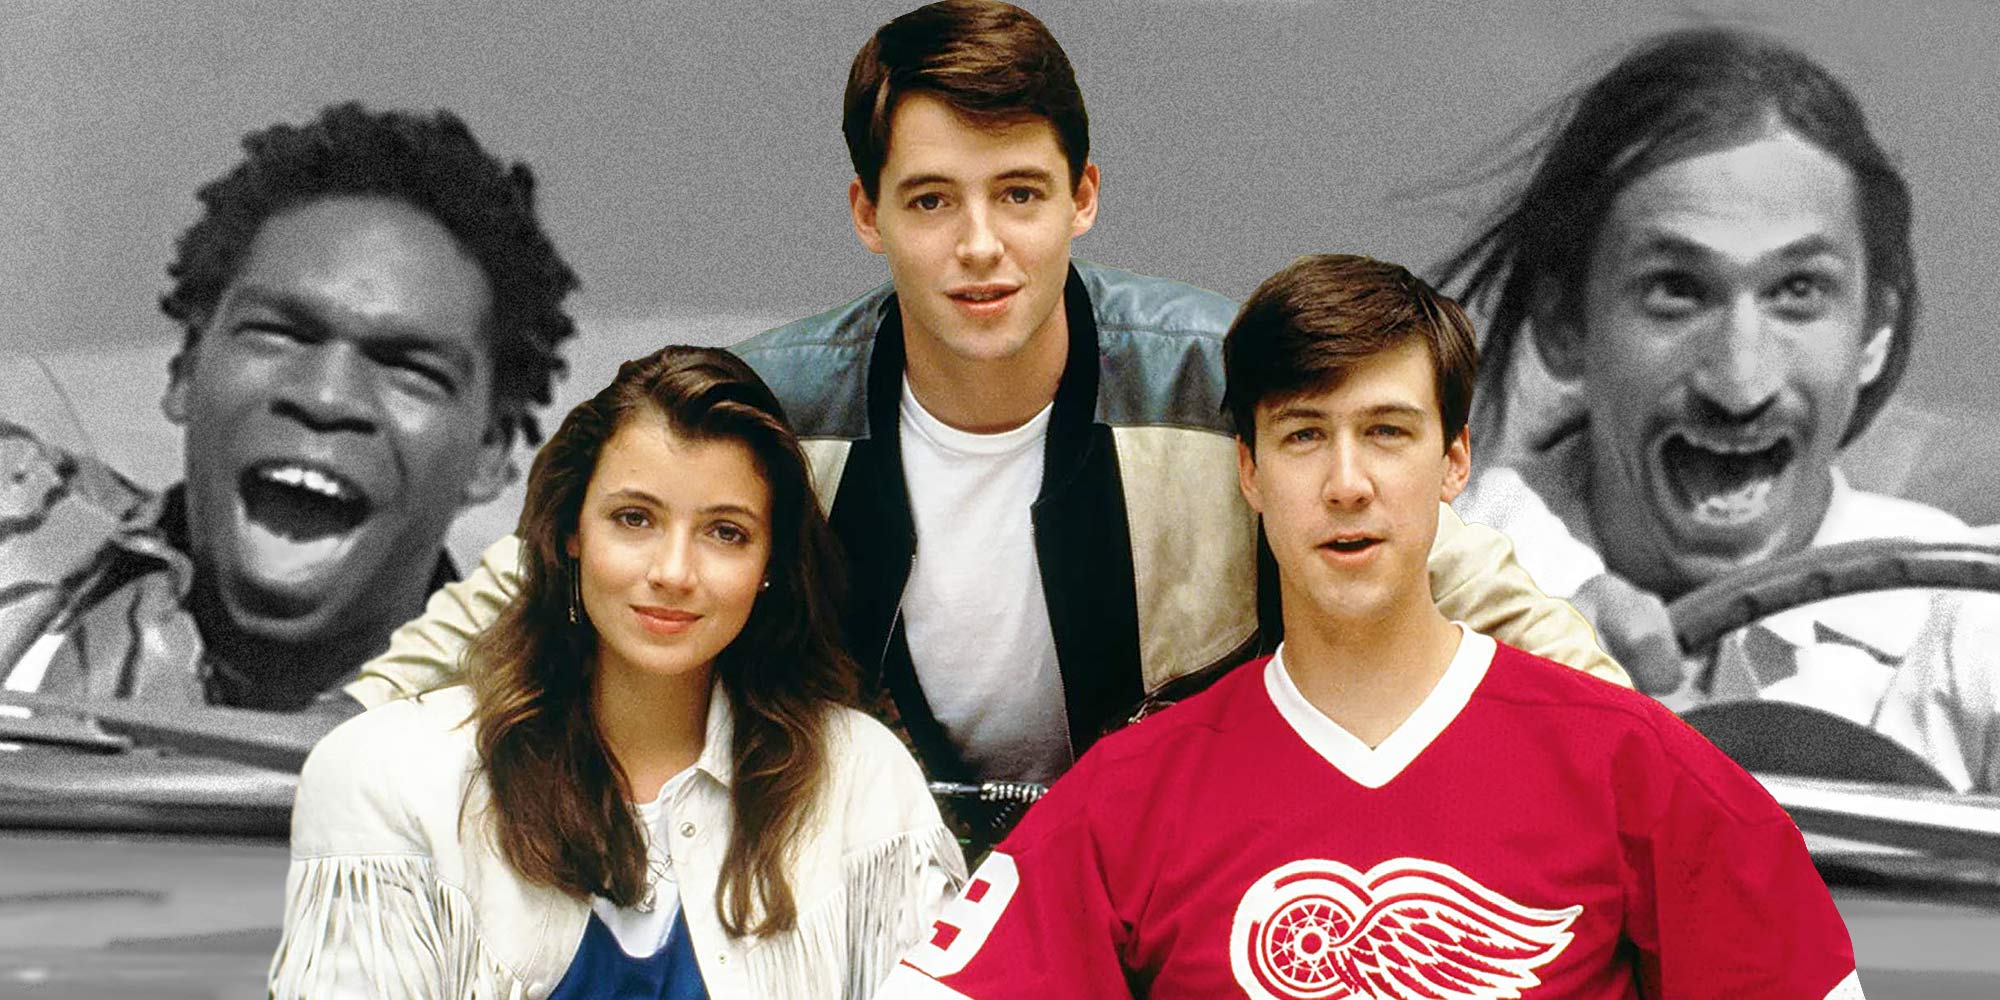 Ferris Bueller Spinoff Movie About Surprising Characters In Development. @a...